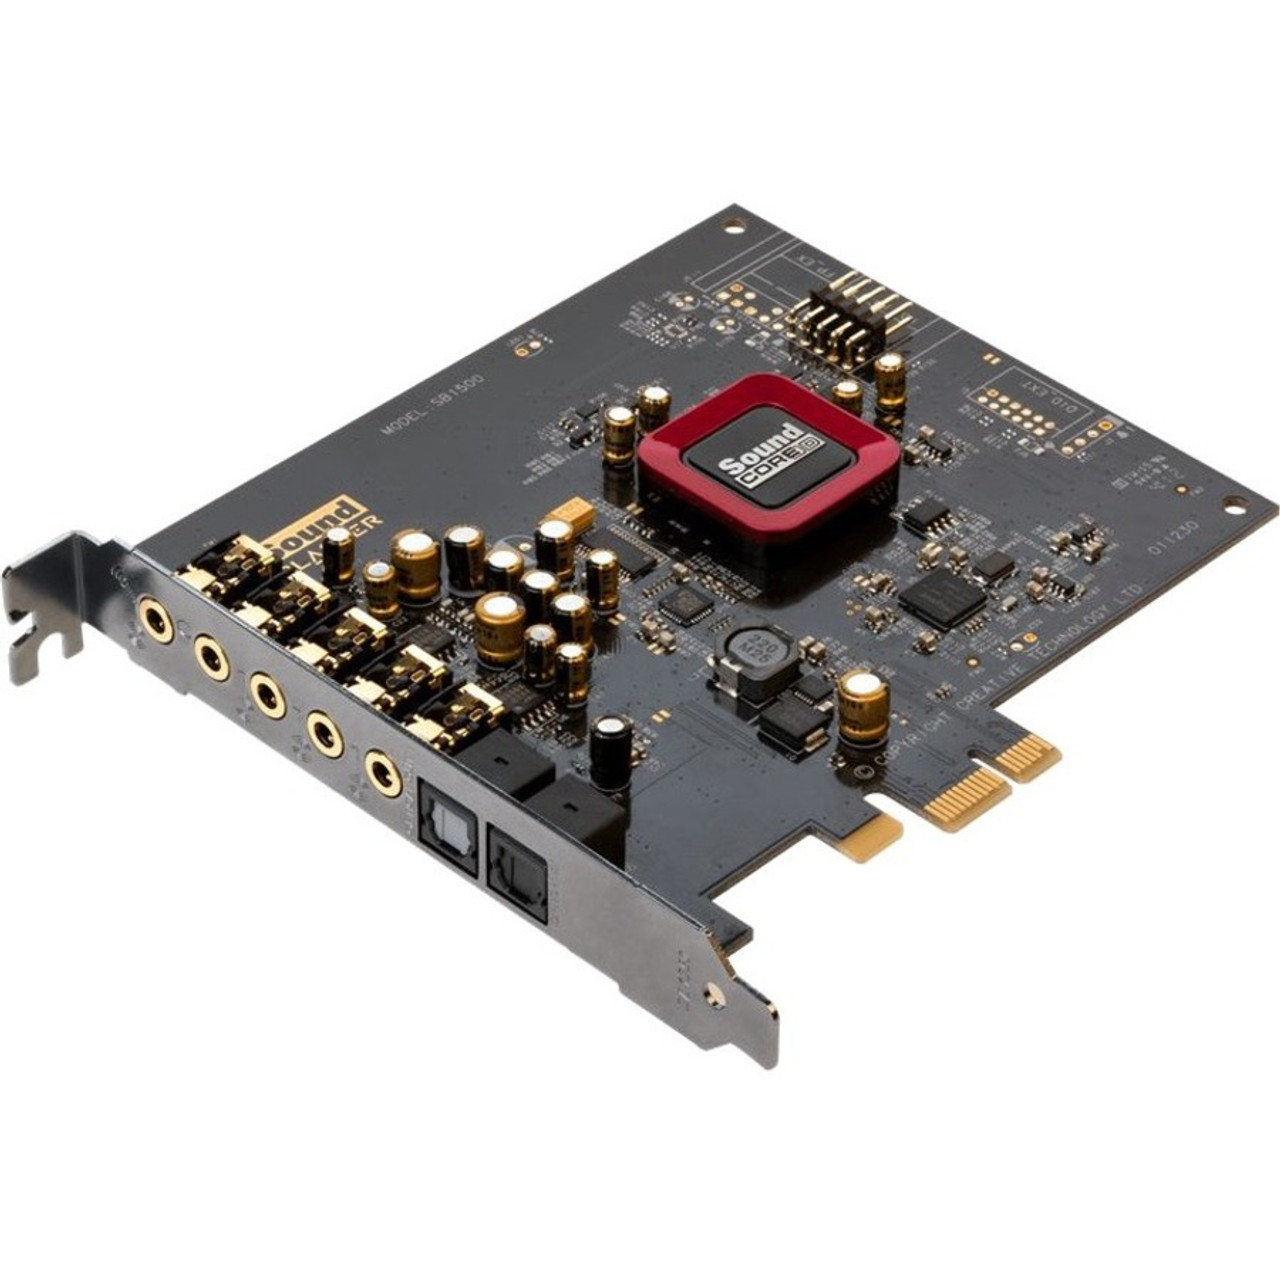 Creative High-performance PCI-e Gaming and Entertainment Sound Card and DAC